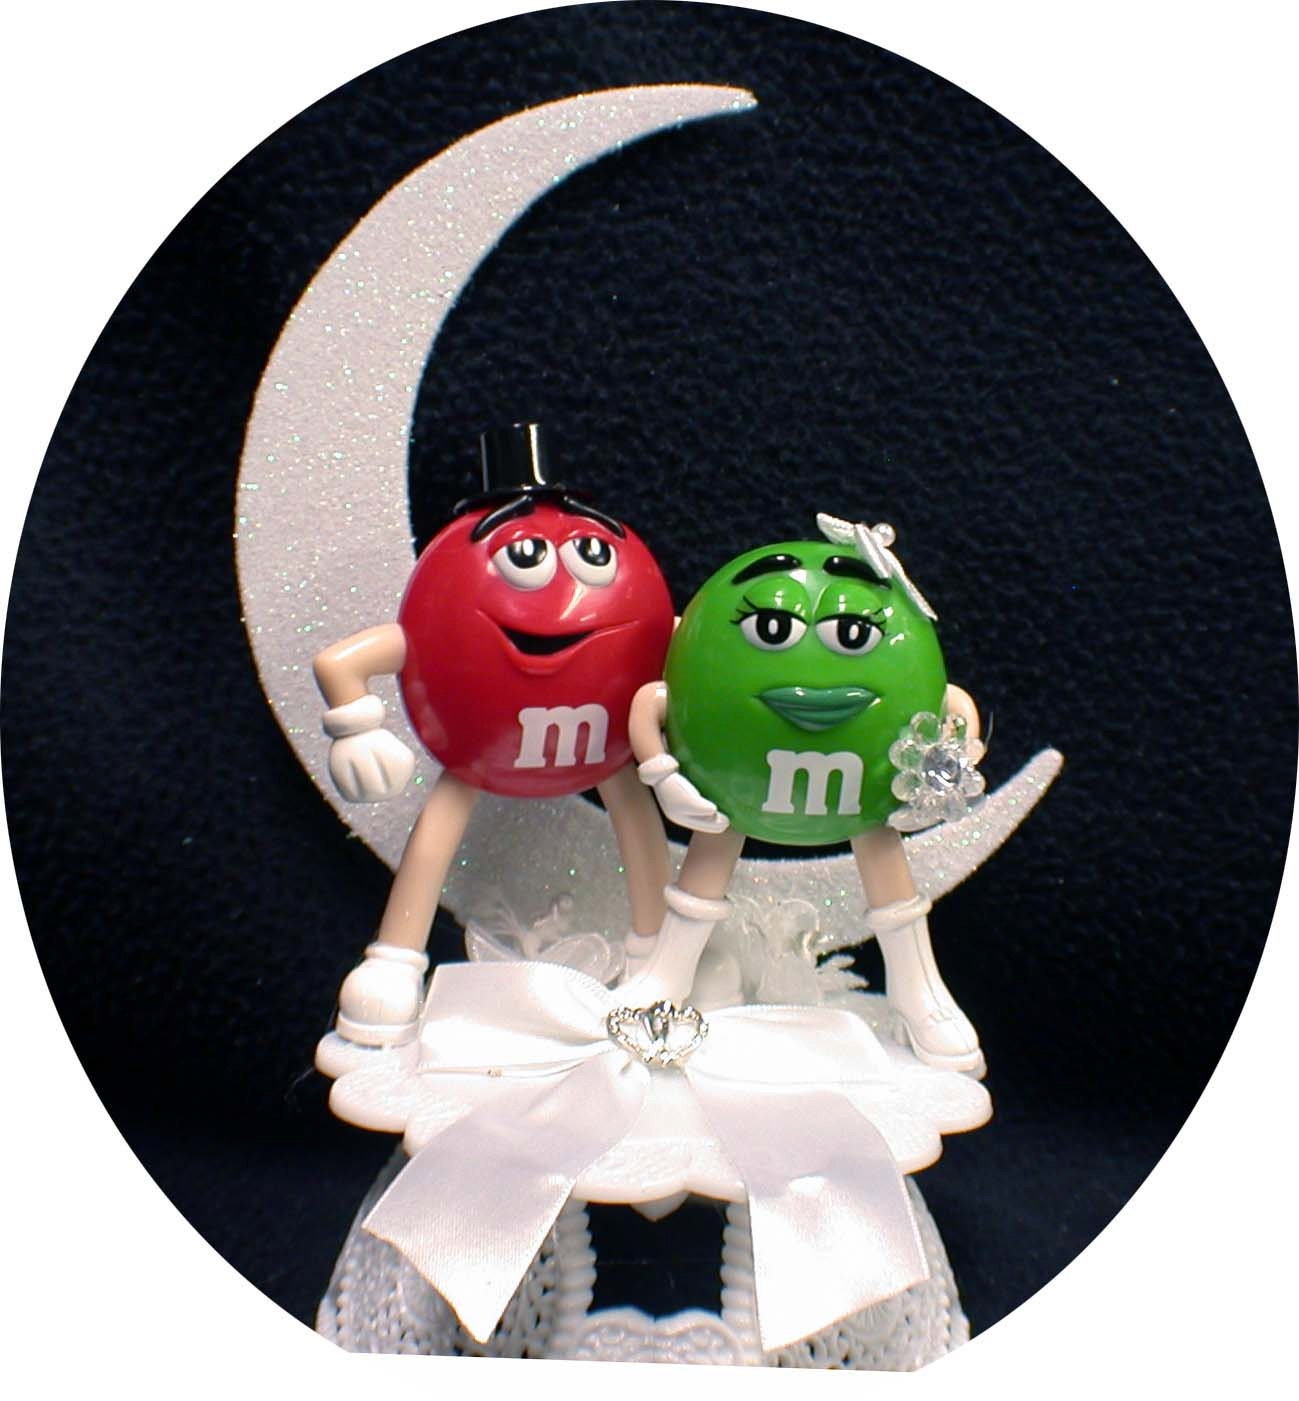 M&M Chocolate Candy Evolution Edible Cake Topper Image ABPID52202 